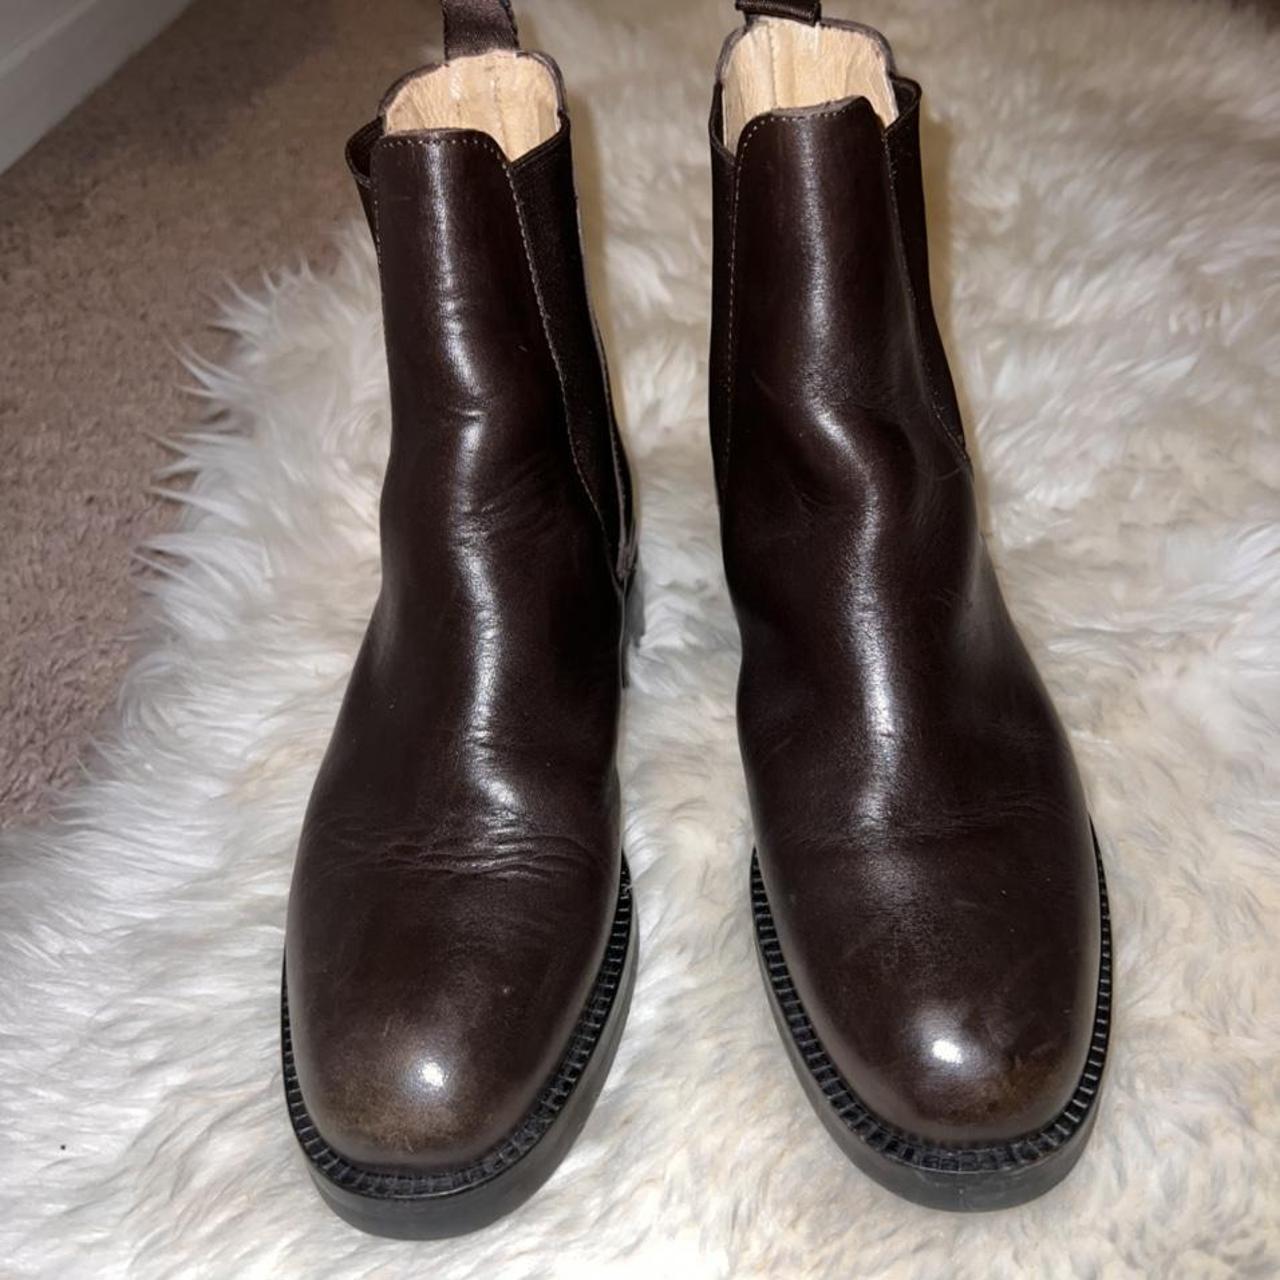 Barney's Women's Brown and Black Boots (2)